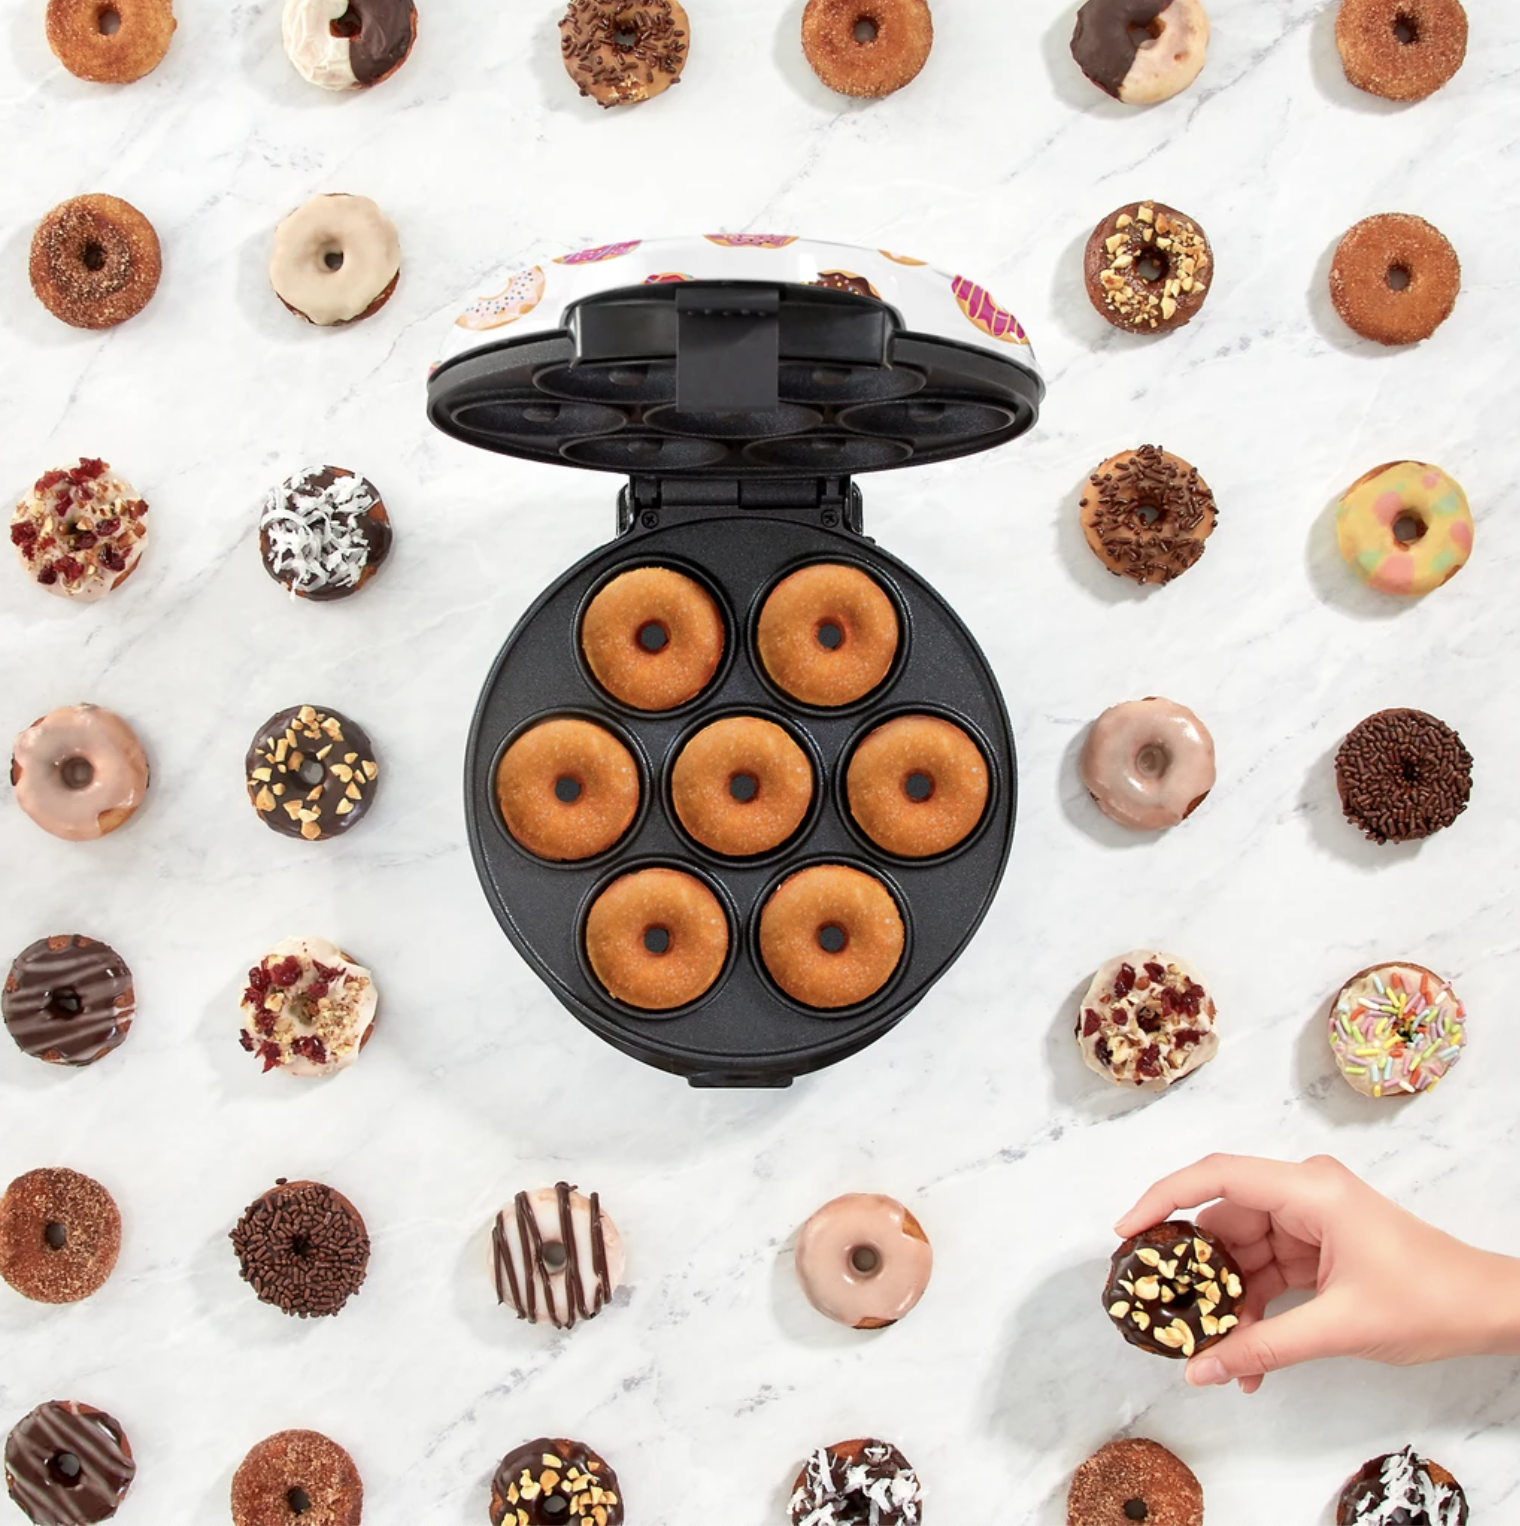 The machine surrounded by different types of donuts